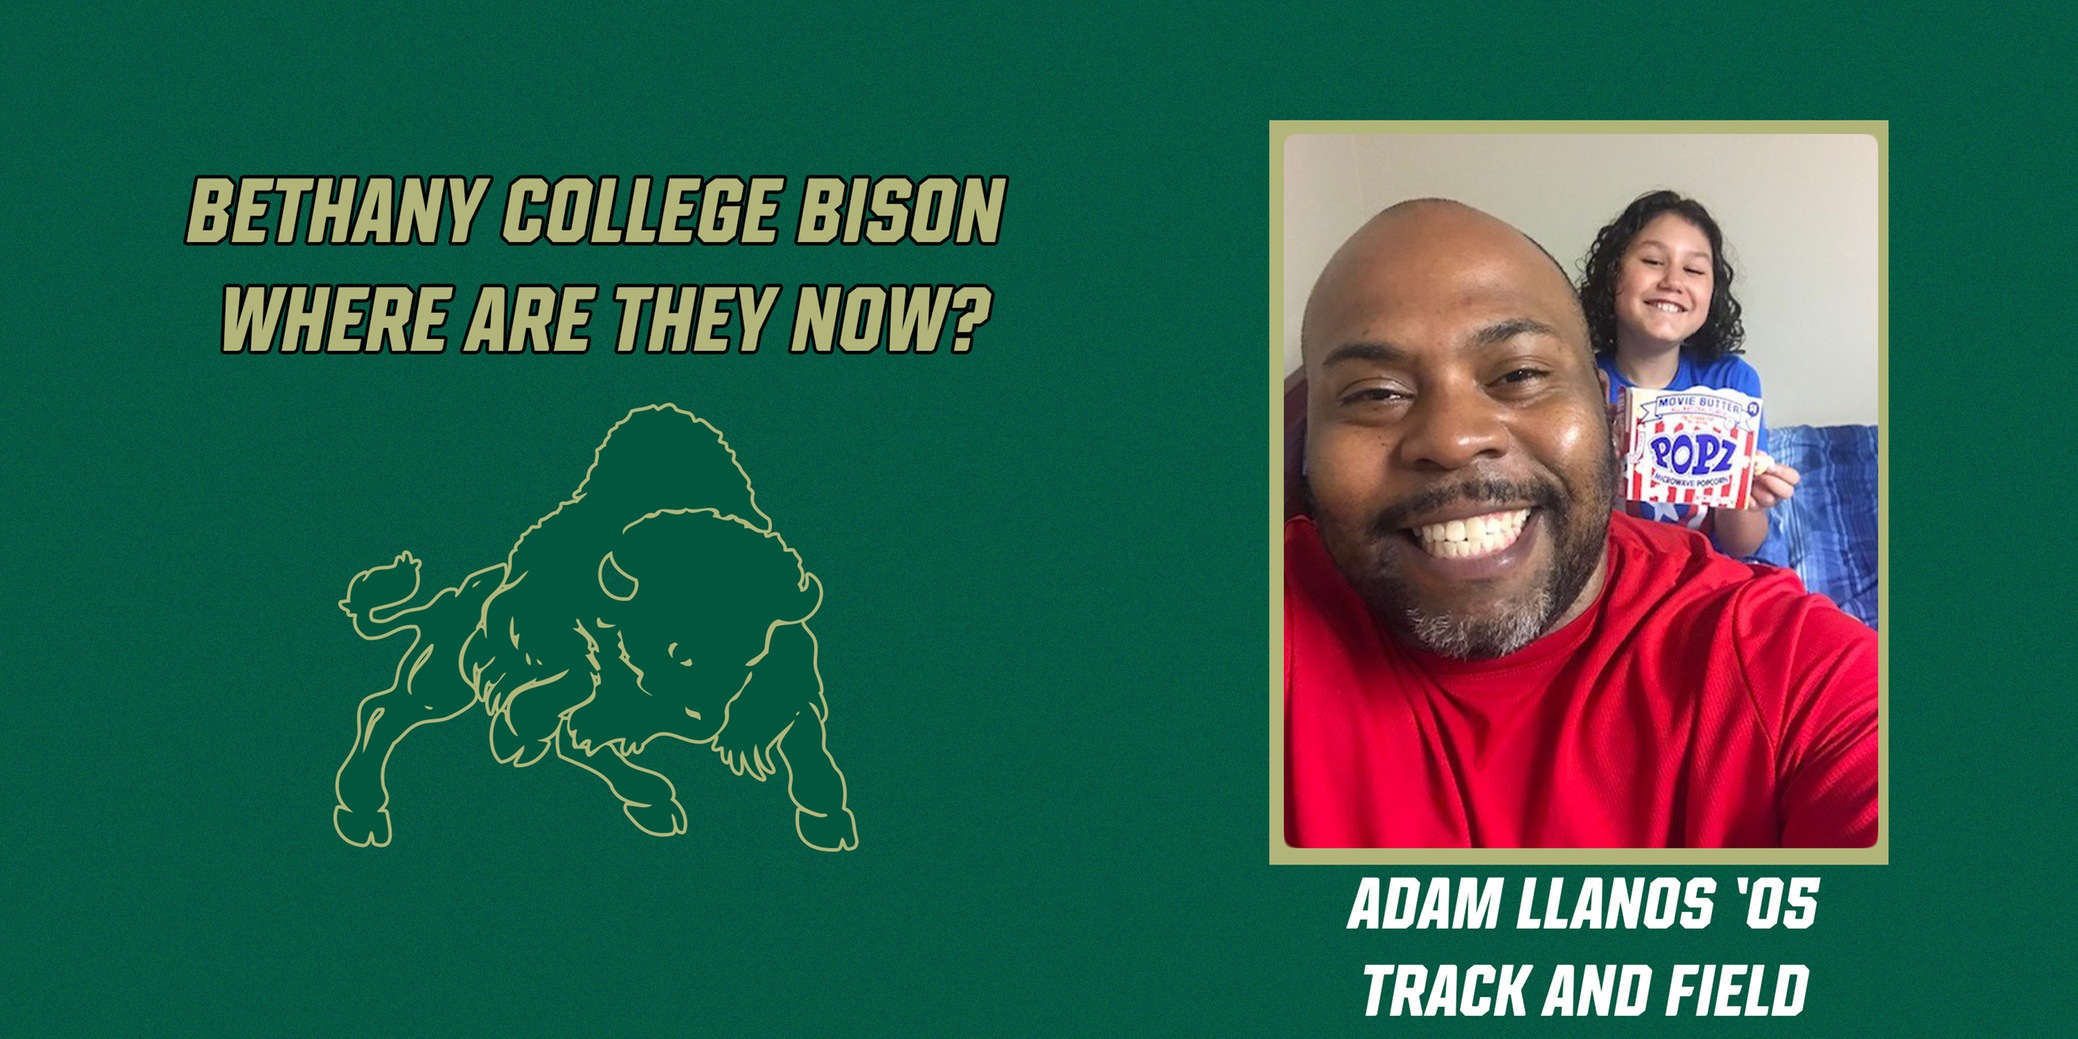 Where Are They Now Series - Adam Llanos '05, Track and Field